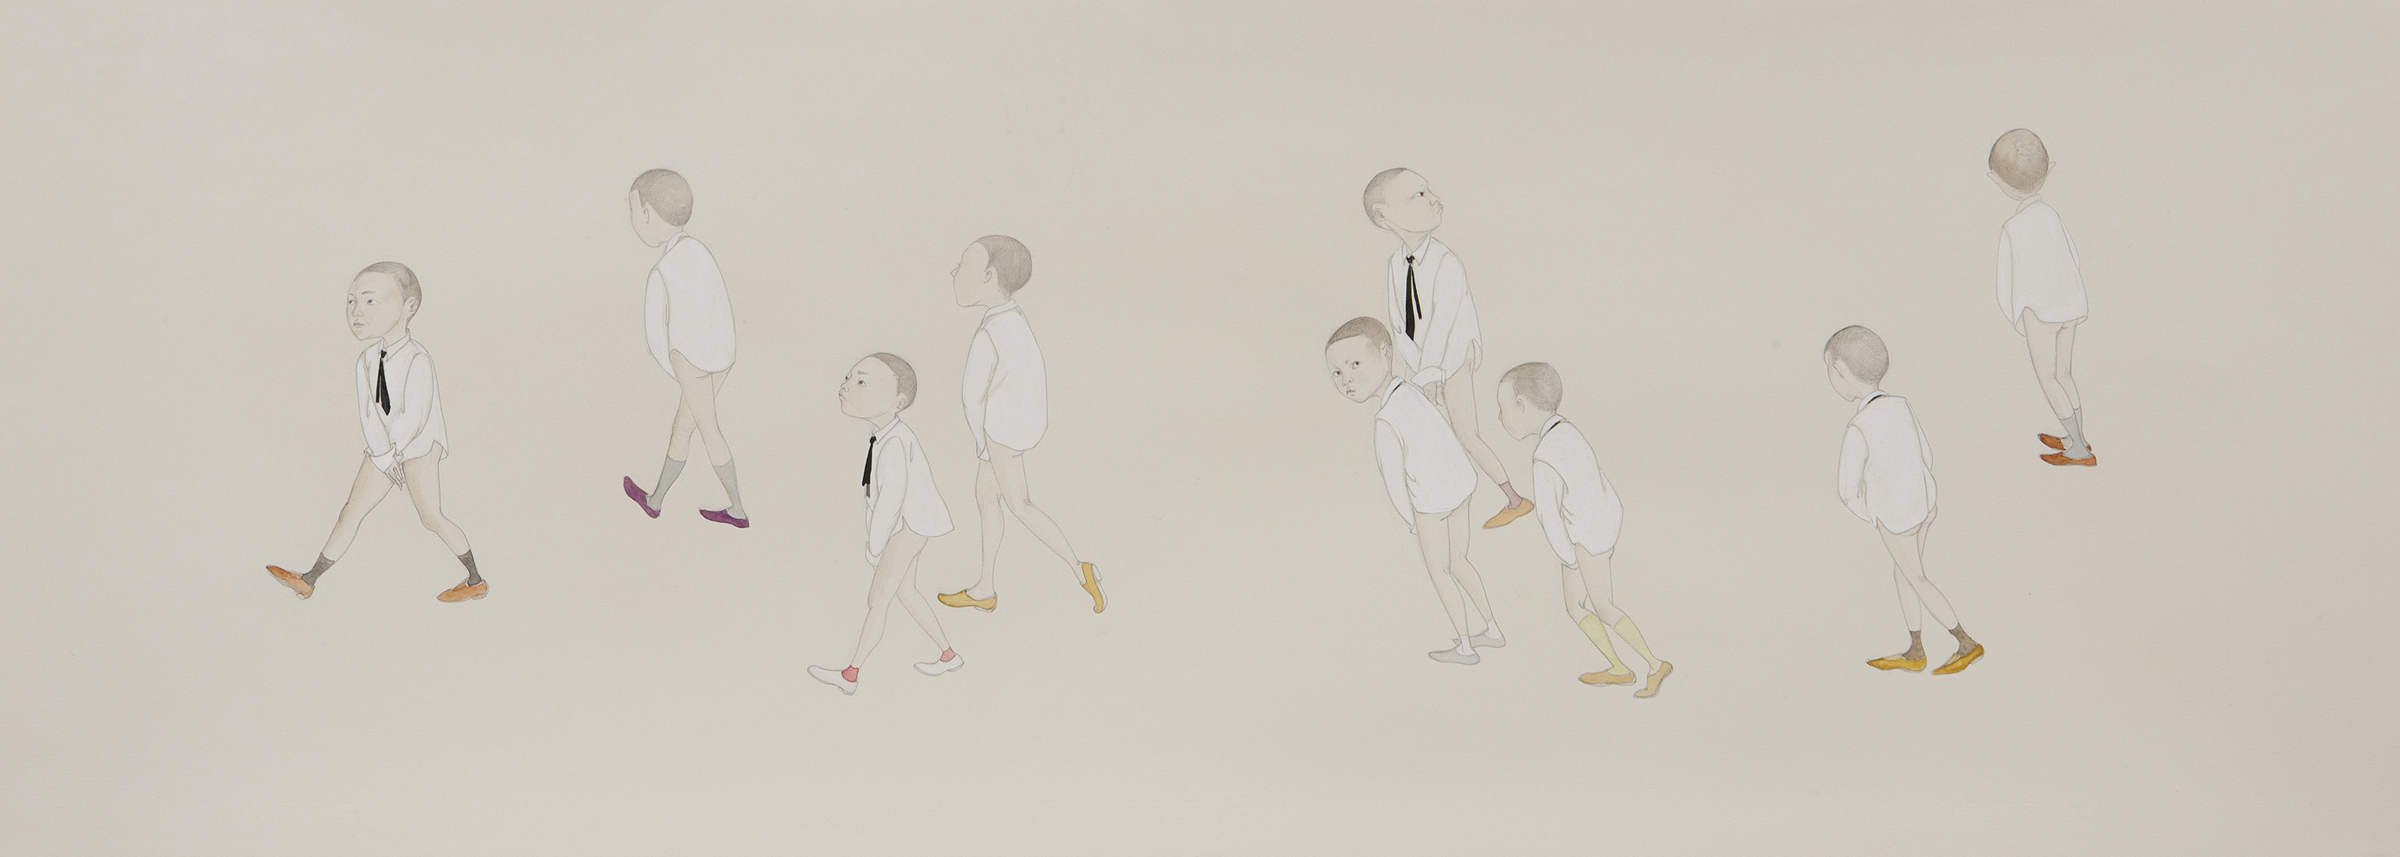   Walk Of Shame , 2011 Graphite, watercolor, ink on ivory Fabriana Rosaspina 13.5 x 39 inches Private collection Photo: Bill Orcutt 